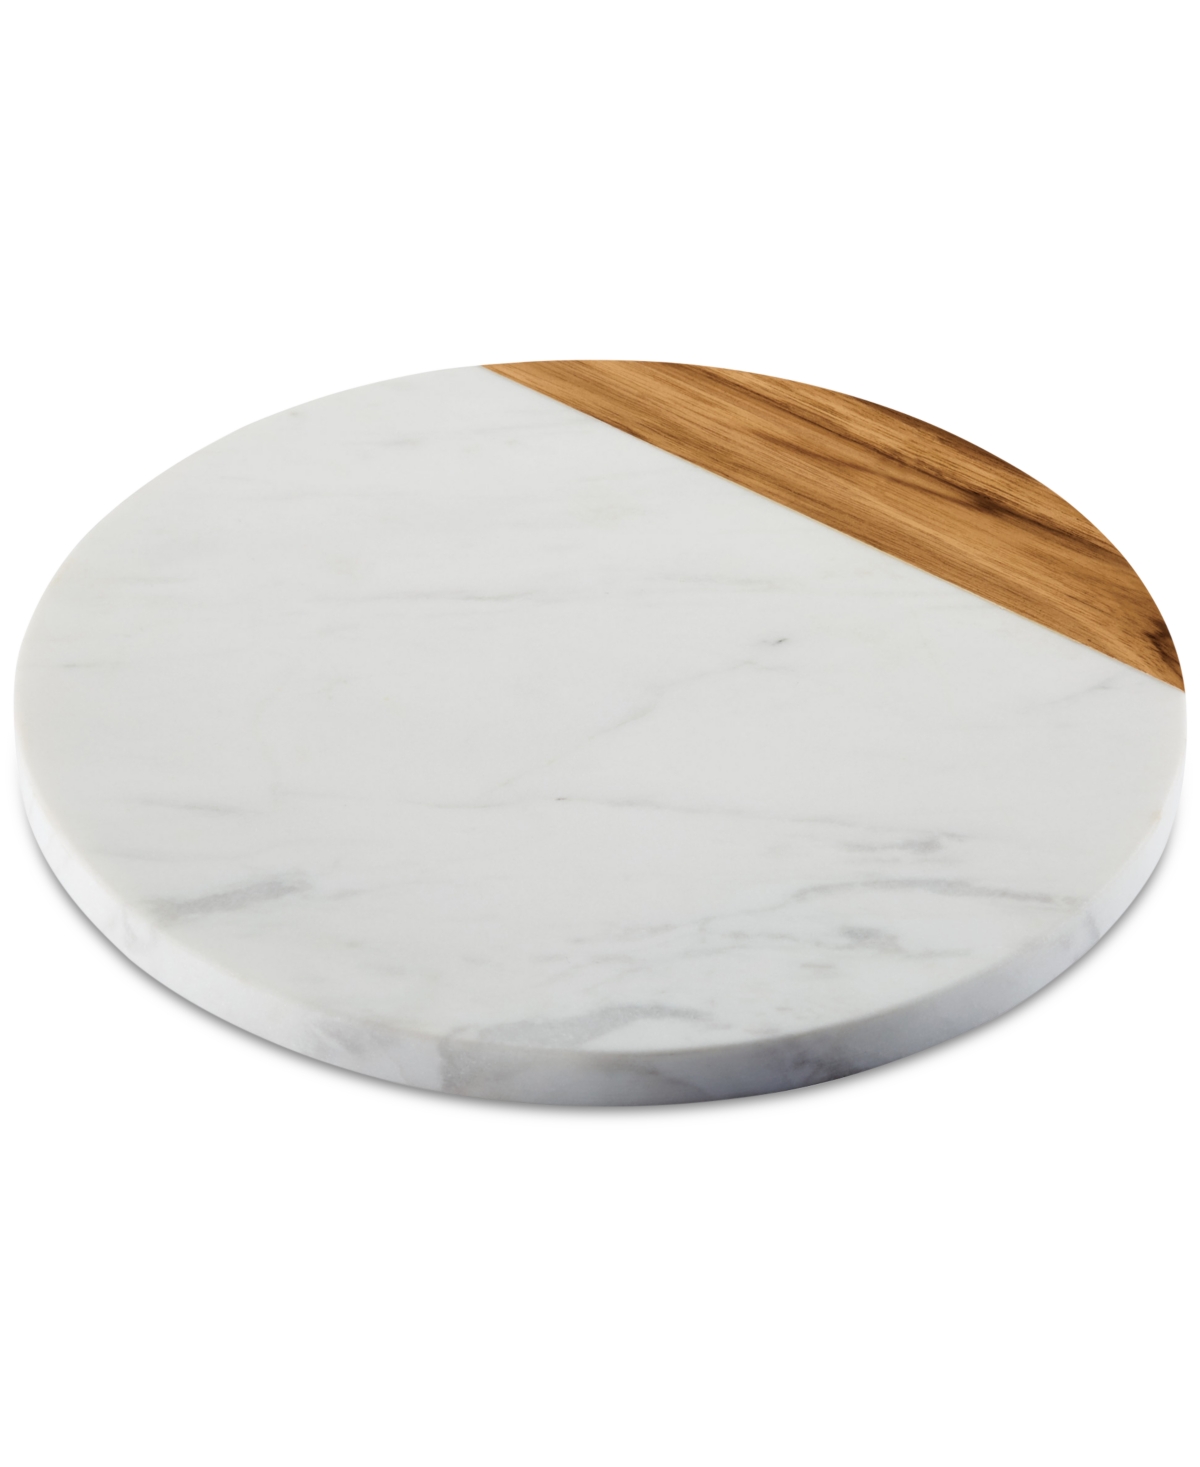 Anolon Pantryware White Marble & Teak Wood 10 Round Serving Board